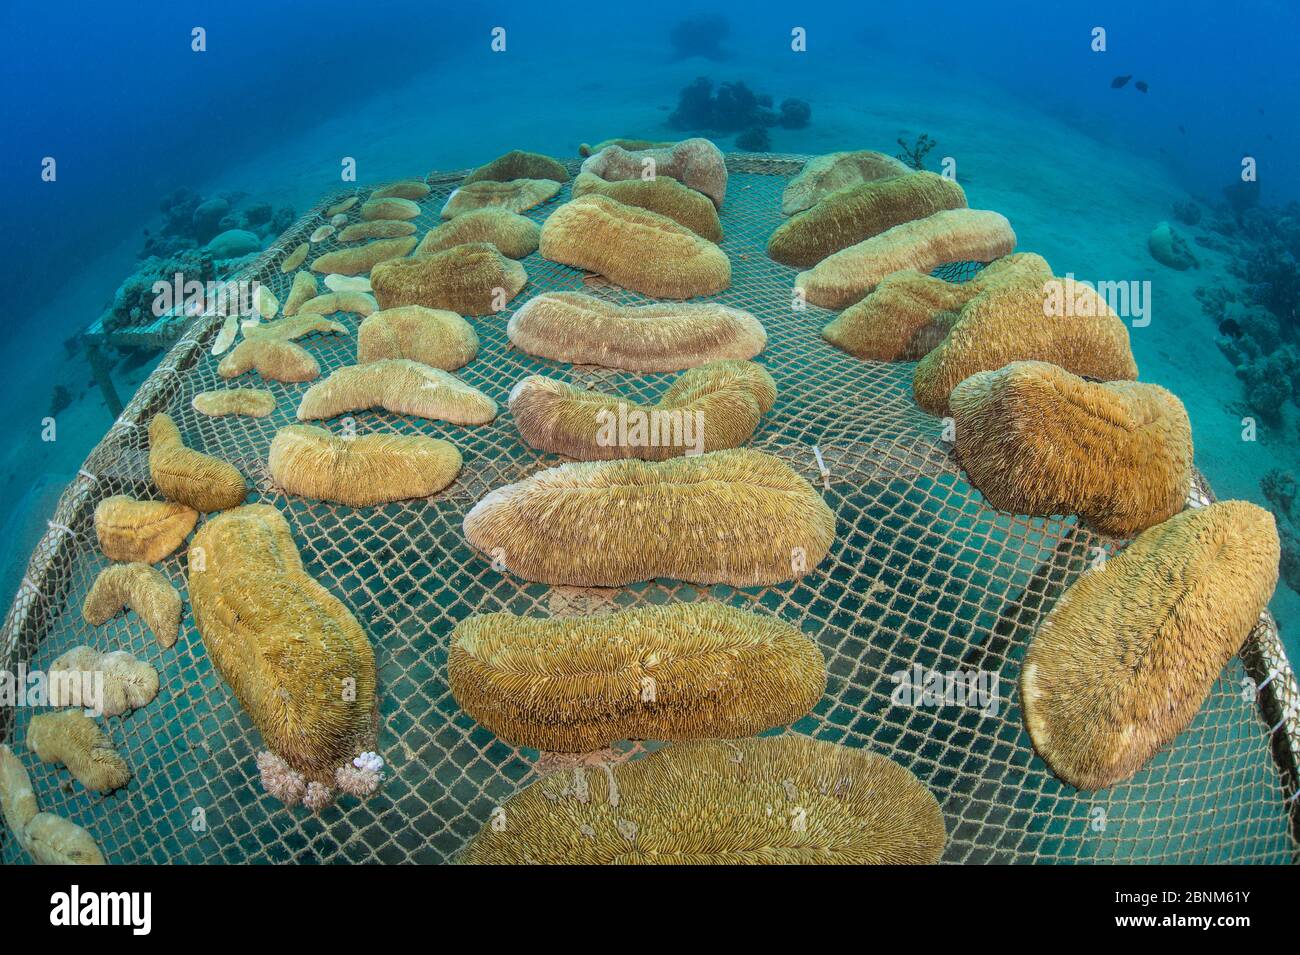 Wide angle view of coral propagation table with mushroom corals (Herpolitha limax) Aqaba, Jordan. Gulf of Aqaba, Red Sea. Stock Photo